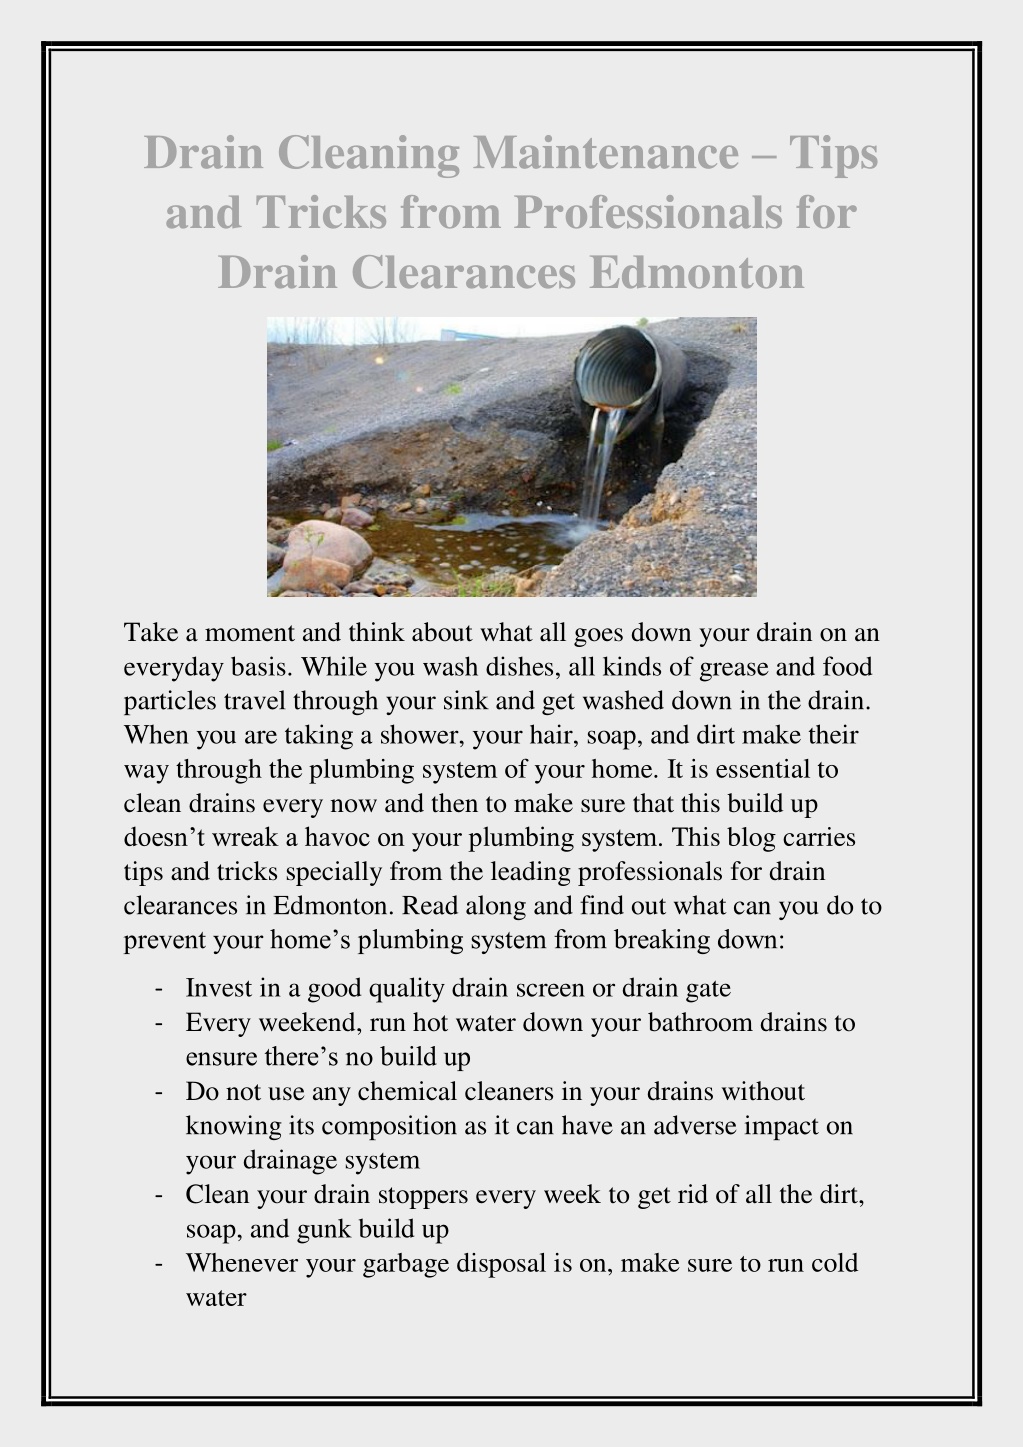 Ppt Drain Cleaning Maintenance Tips And Tricks From Professionals For Drain Clearances